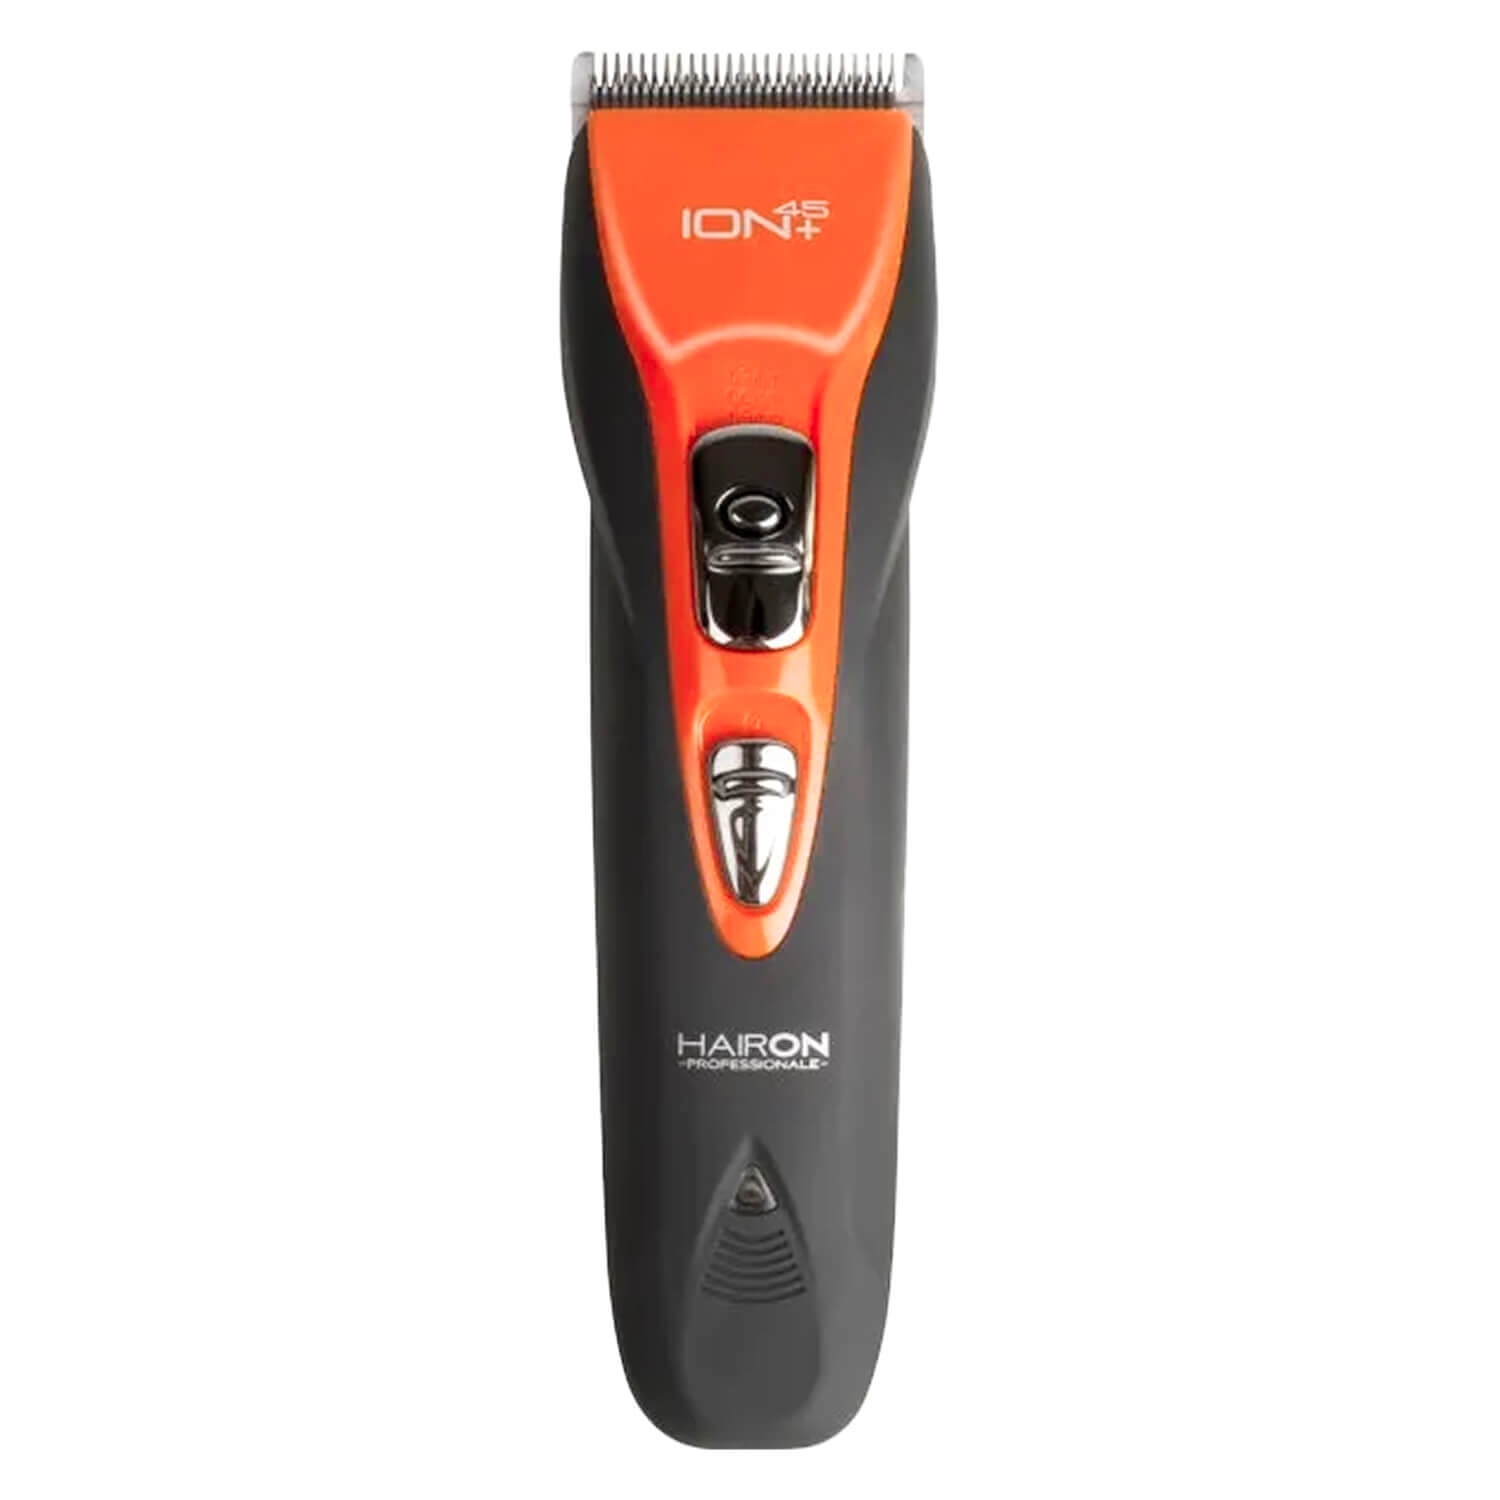 Product image from HAIRON - ION+45 Hair Trimmer